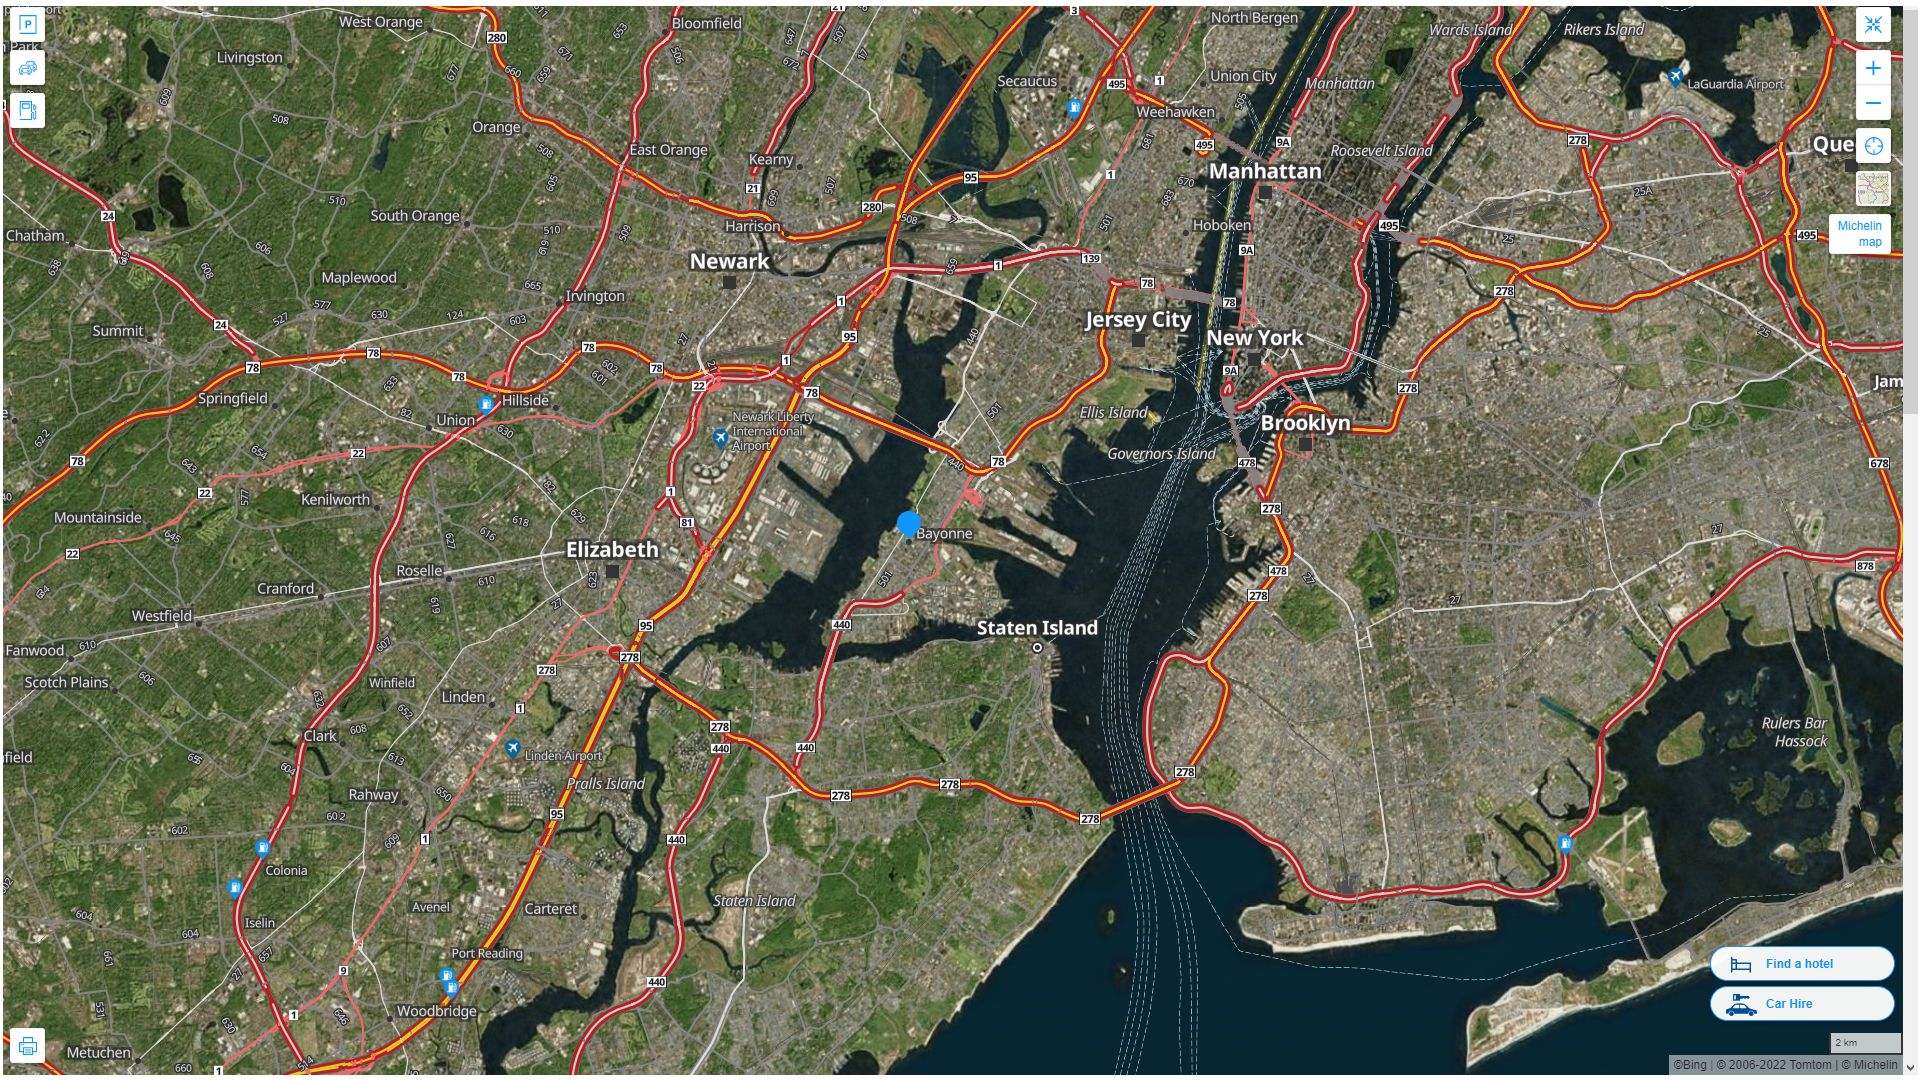 Bayonne New Jersey Highway and Road Map with Satellite View